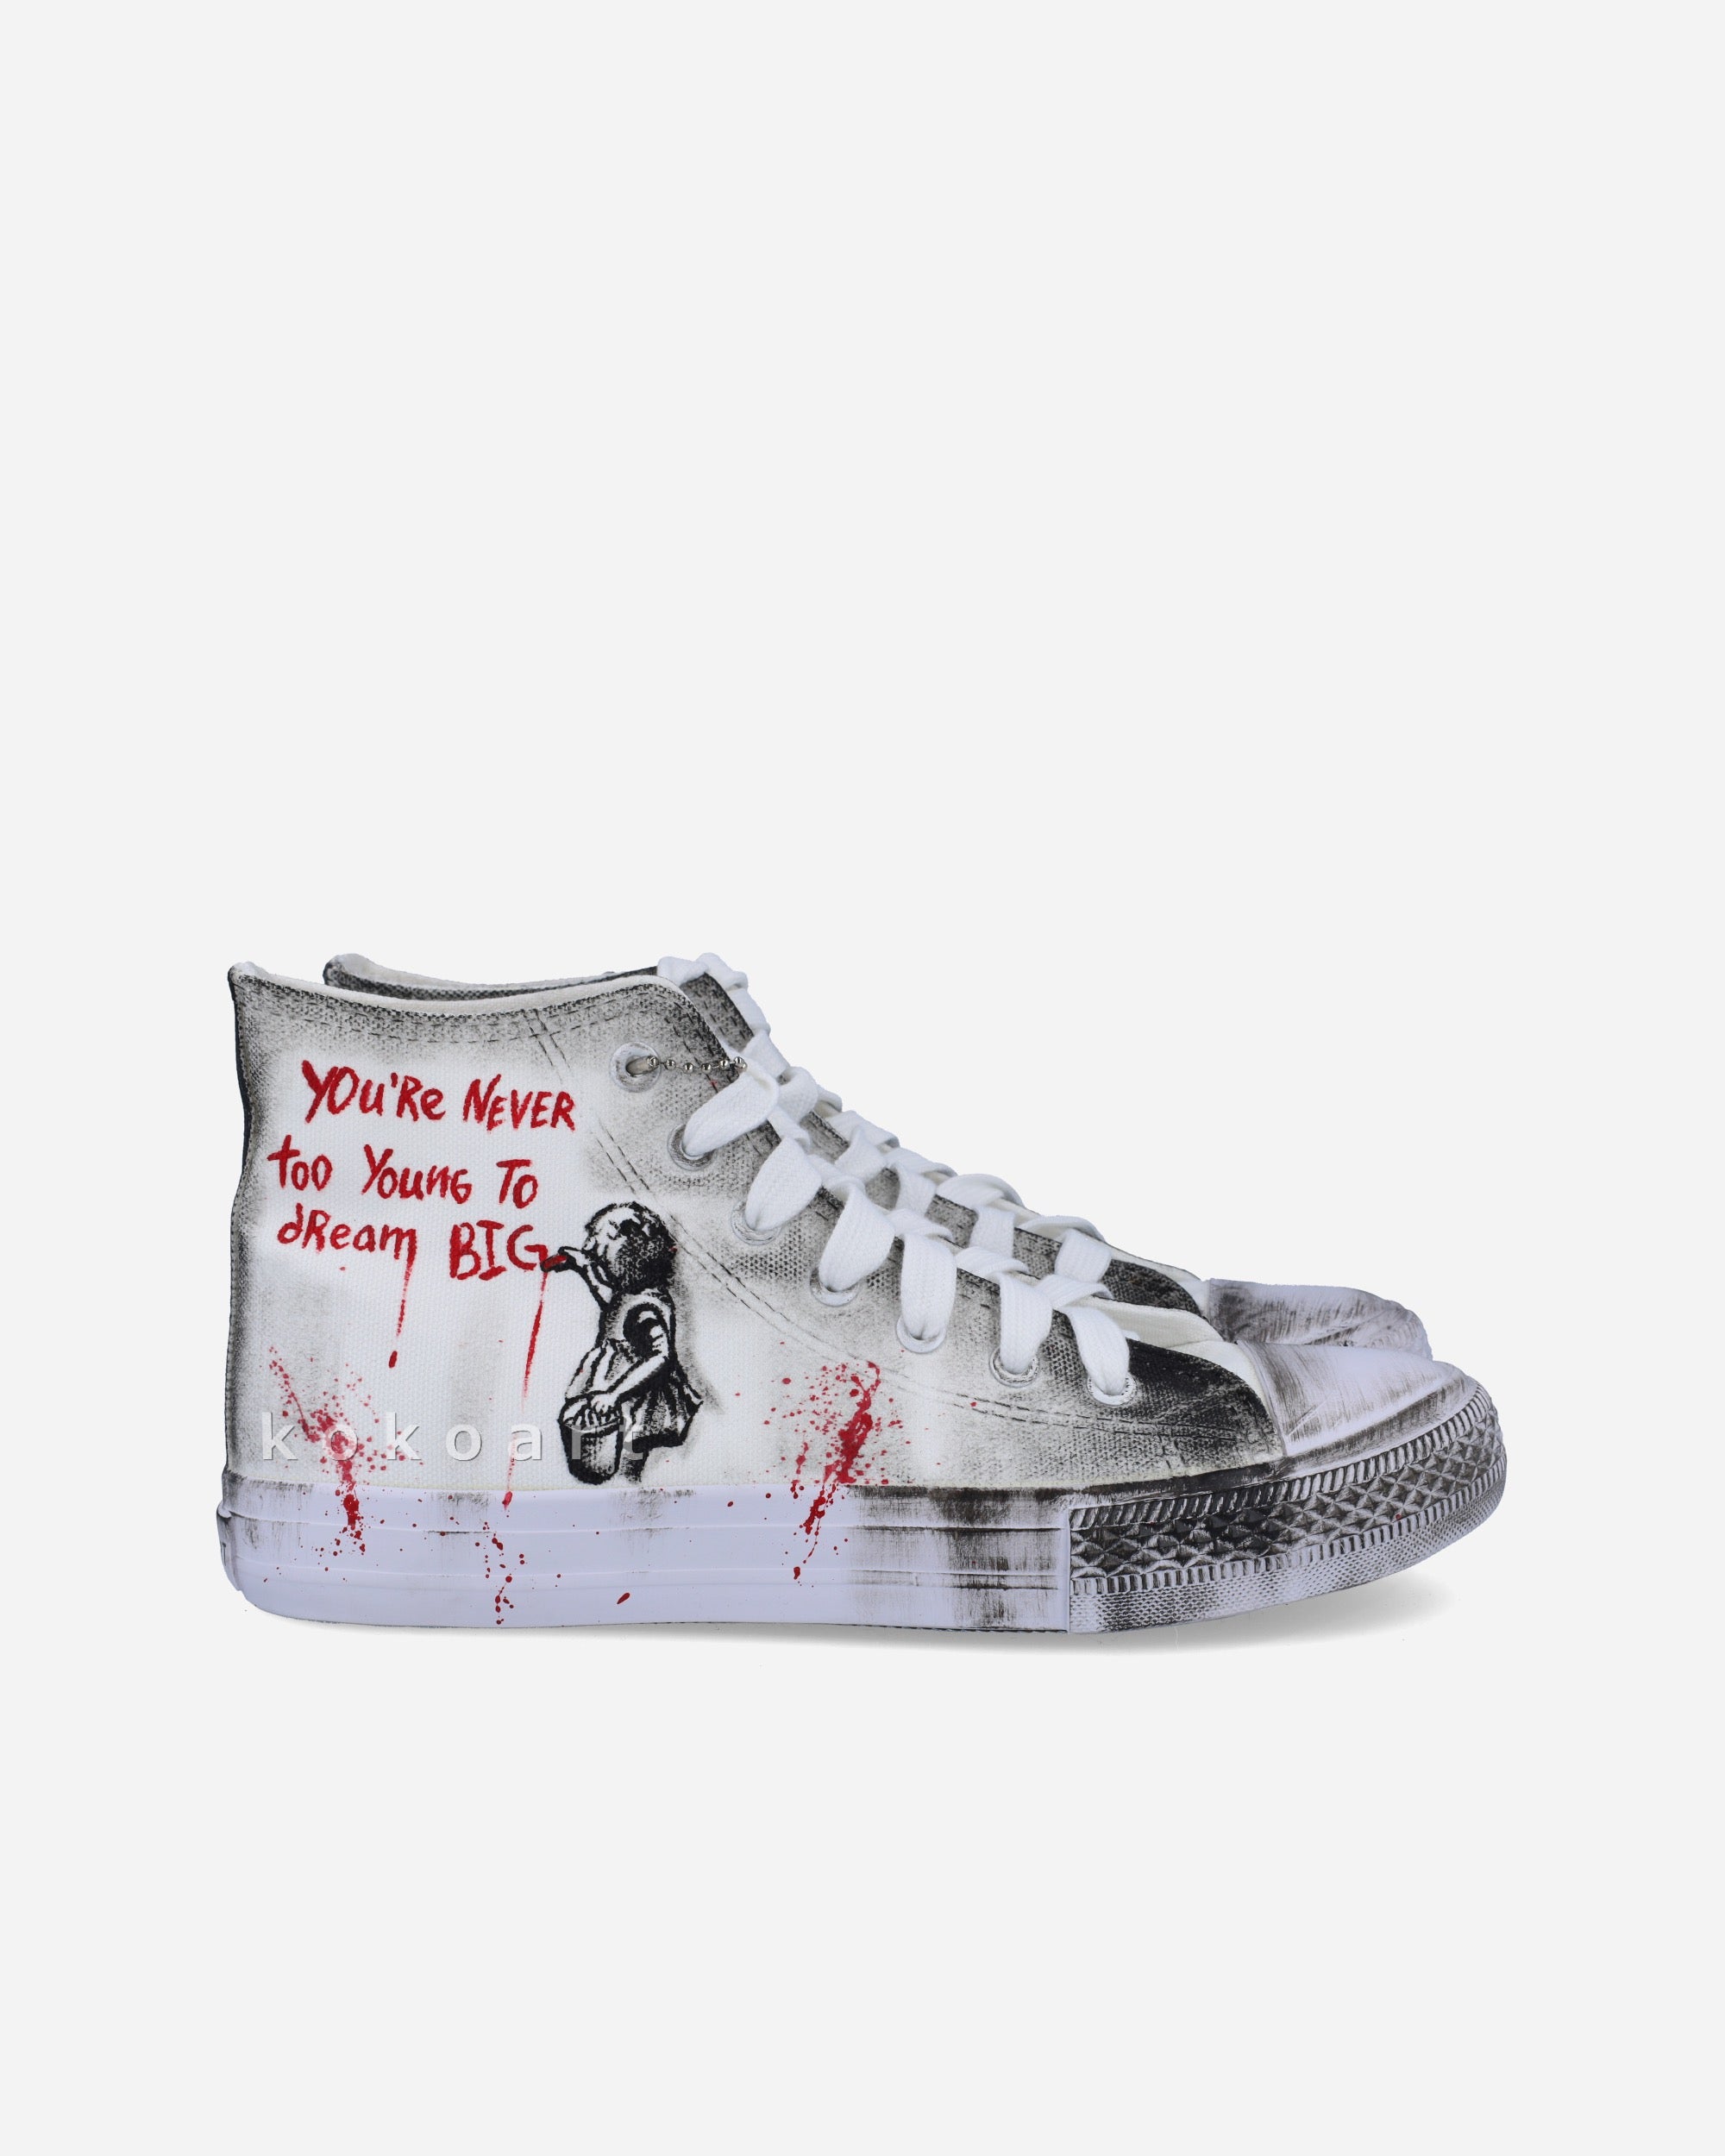 Banksy Hand Painted Shoes